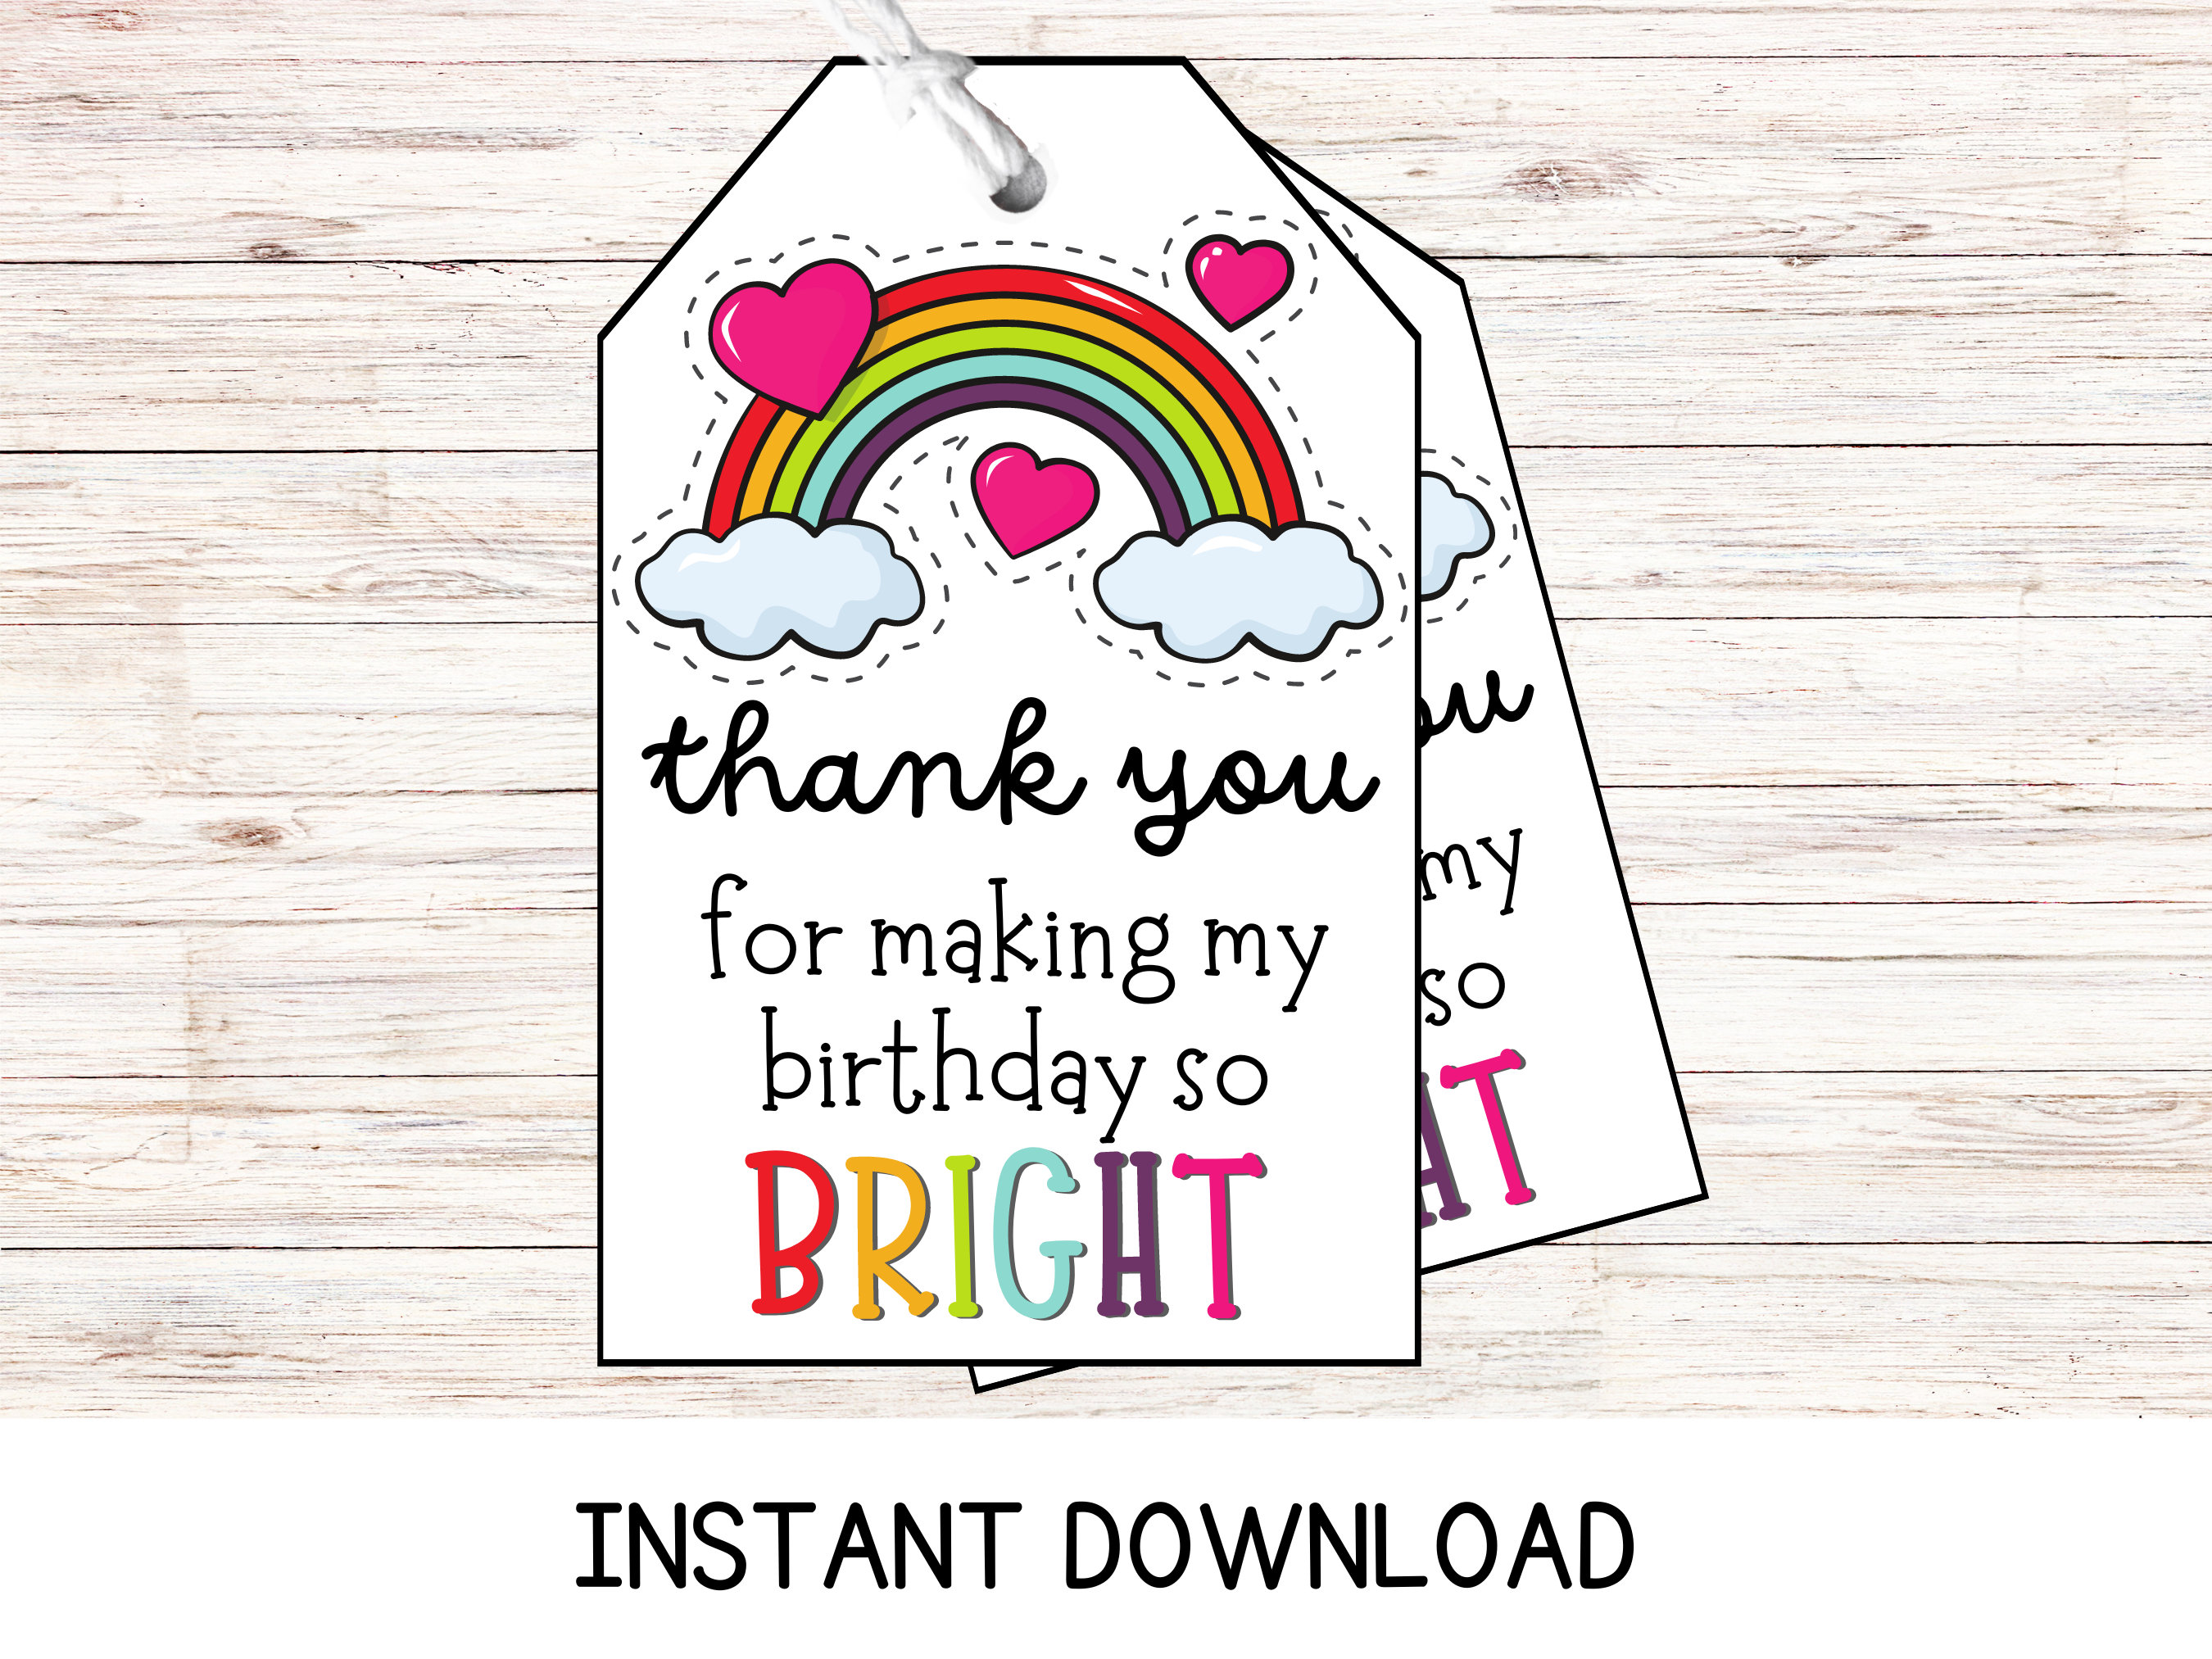 Thank You in Rainbow Colored Pencil Poster for Sale by JulzArts